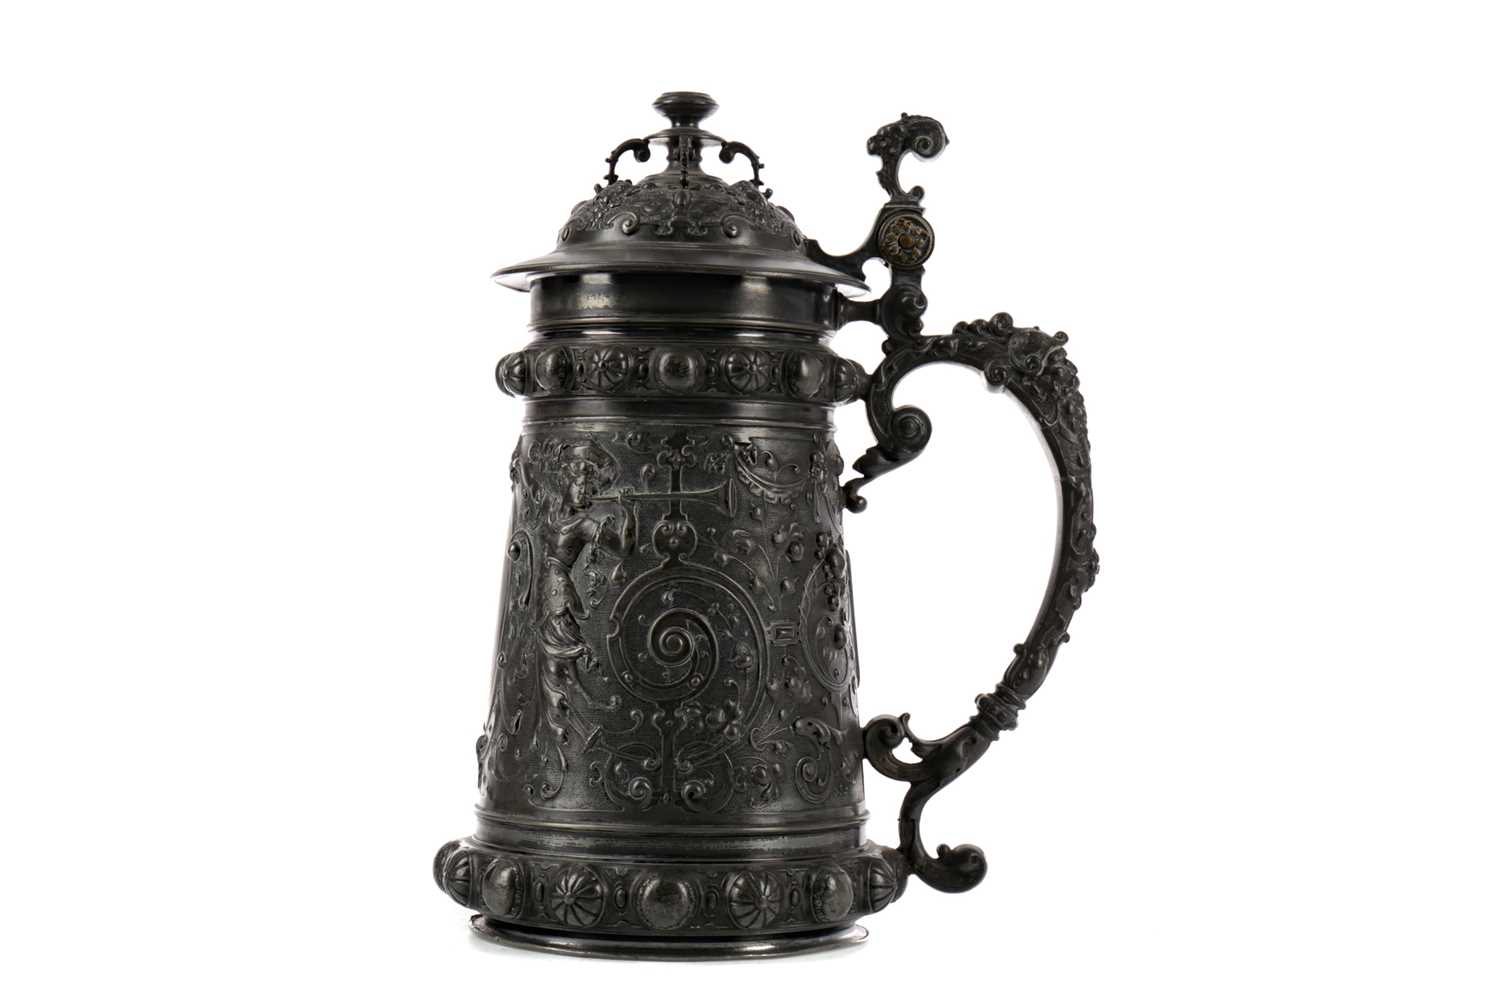 Lot 1752 - A LATE 19TH CENTURY WMF PEWTER TANKARD